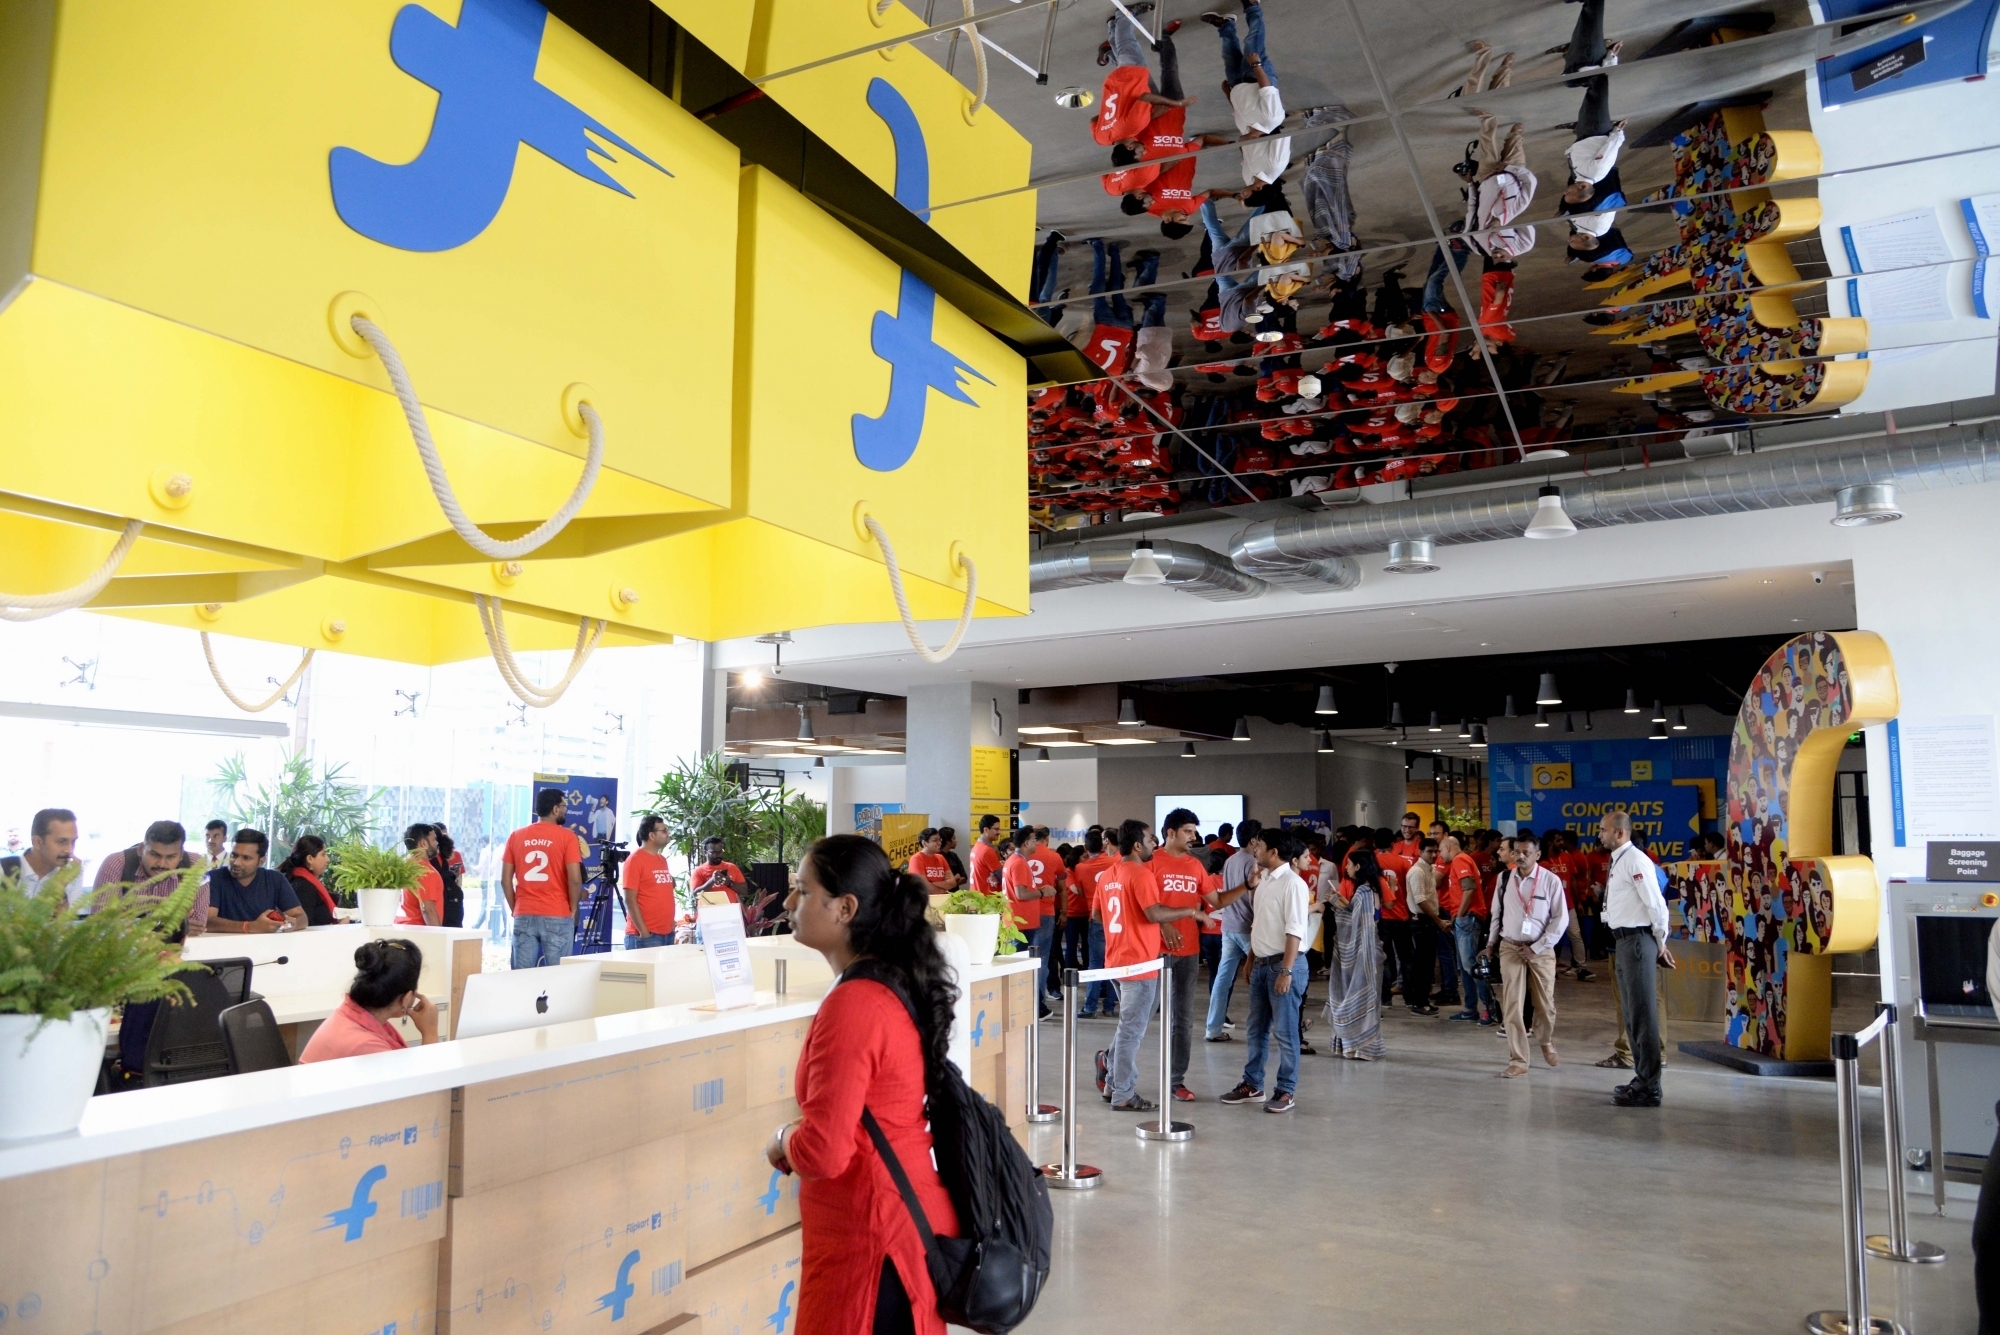 Pre-book your product on Flipkart for just Rs 1 before BBD sale